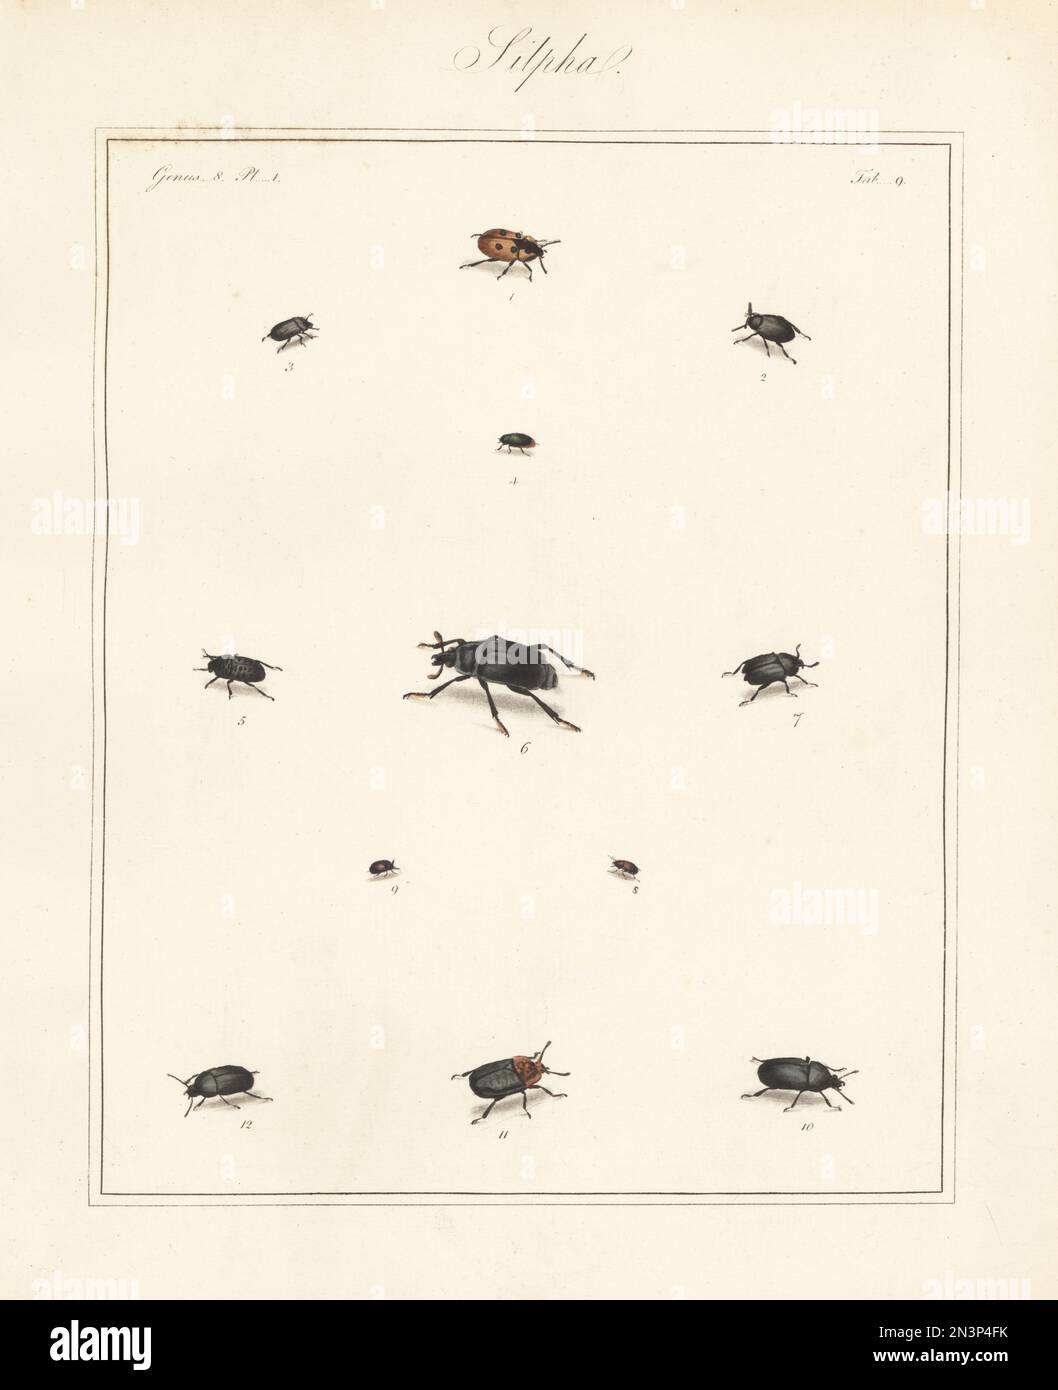 Carrion beetle, Silpha 4-punctata 1, black snail beetle, Silpha atrata 2, Helophorus aquaticus 4, Thanatophilus rugosus 5, Nicrophorus germanicus 6, Thanatophilus sinuatus 7, Soronia grisea 8, Omosita depressa 9, Silpha laevigata 10, red-breasted carrion beetle, Oiceoptoma thoracicum 11, and Silpha obscura 12. Handcoloured copperplate engraving from Thomas Martyn’s The English Entomologist, Exhibiting all the Coleopterous Insects found in England, Academy for Illustrating and Painting Natural History, London, 1792. Stock Photo